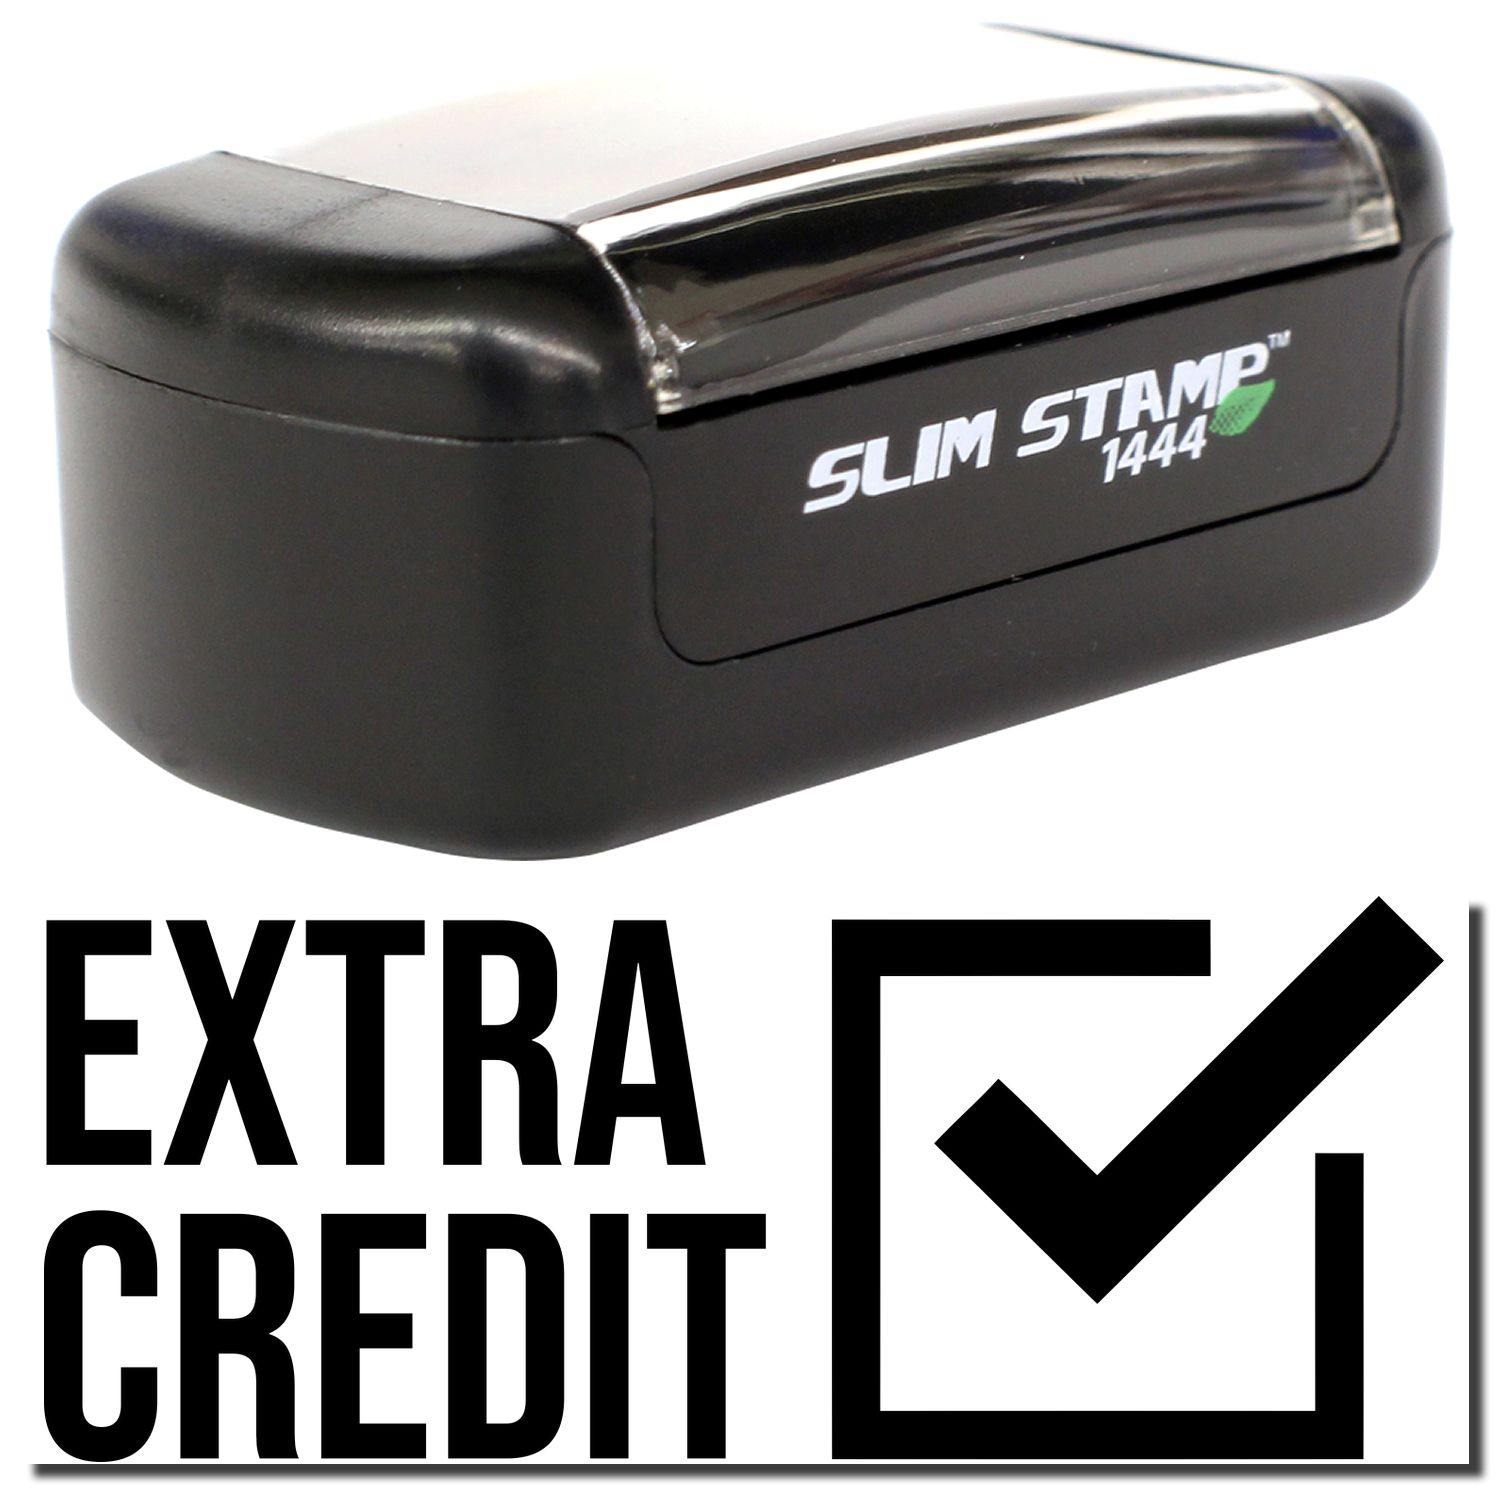 A stock office pre-inked stamp with a stamped image showing how the text "EXTRA CREDIT" with a checkbox on the right side is displayed after stamping.